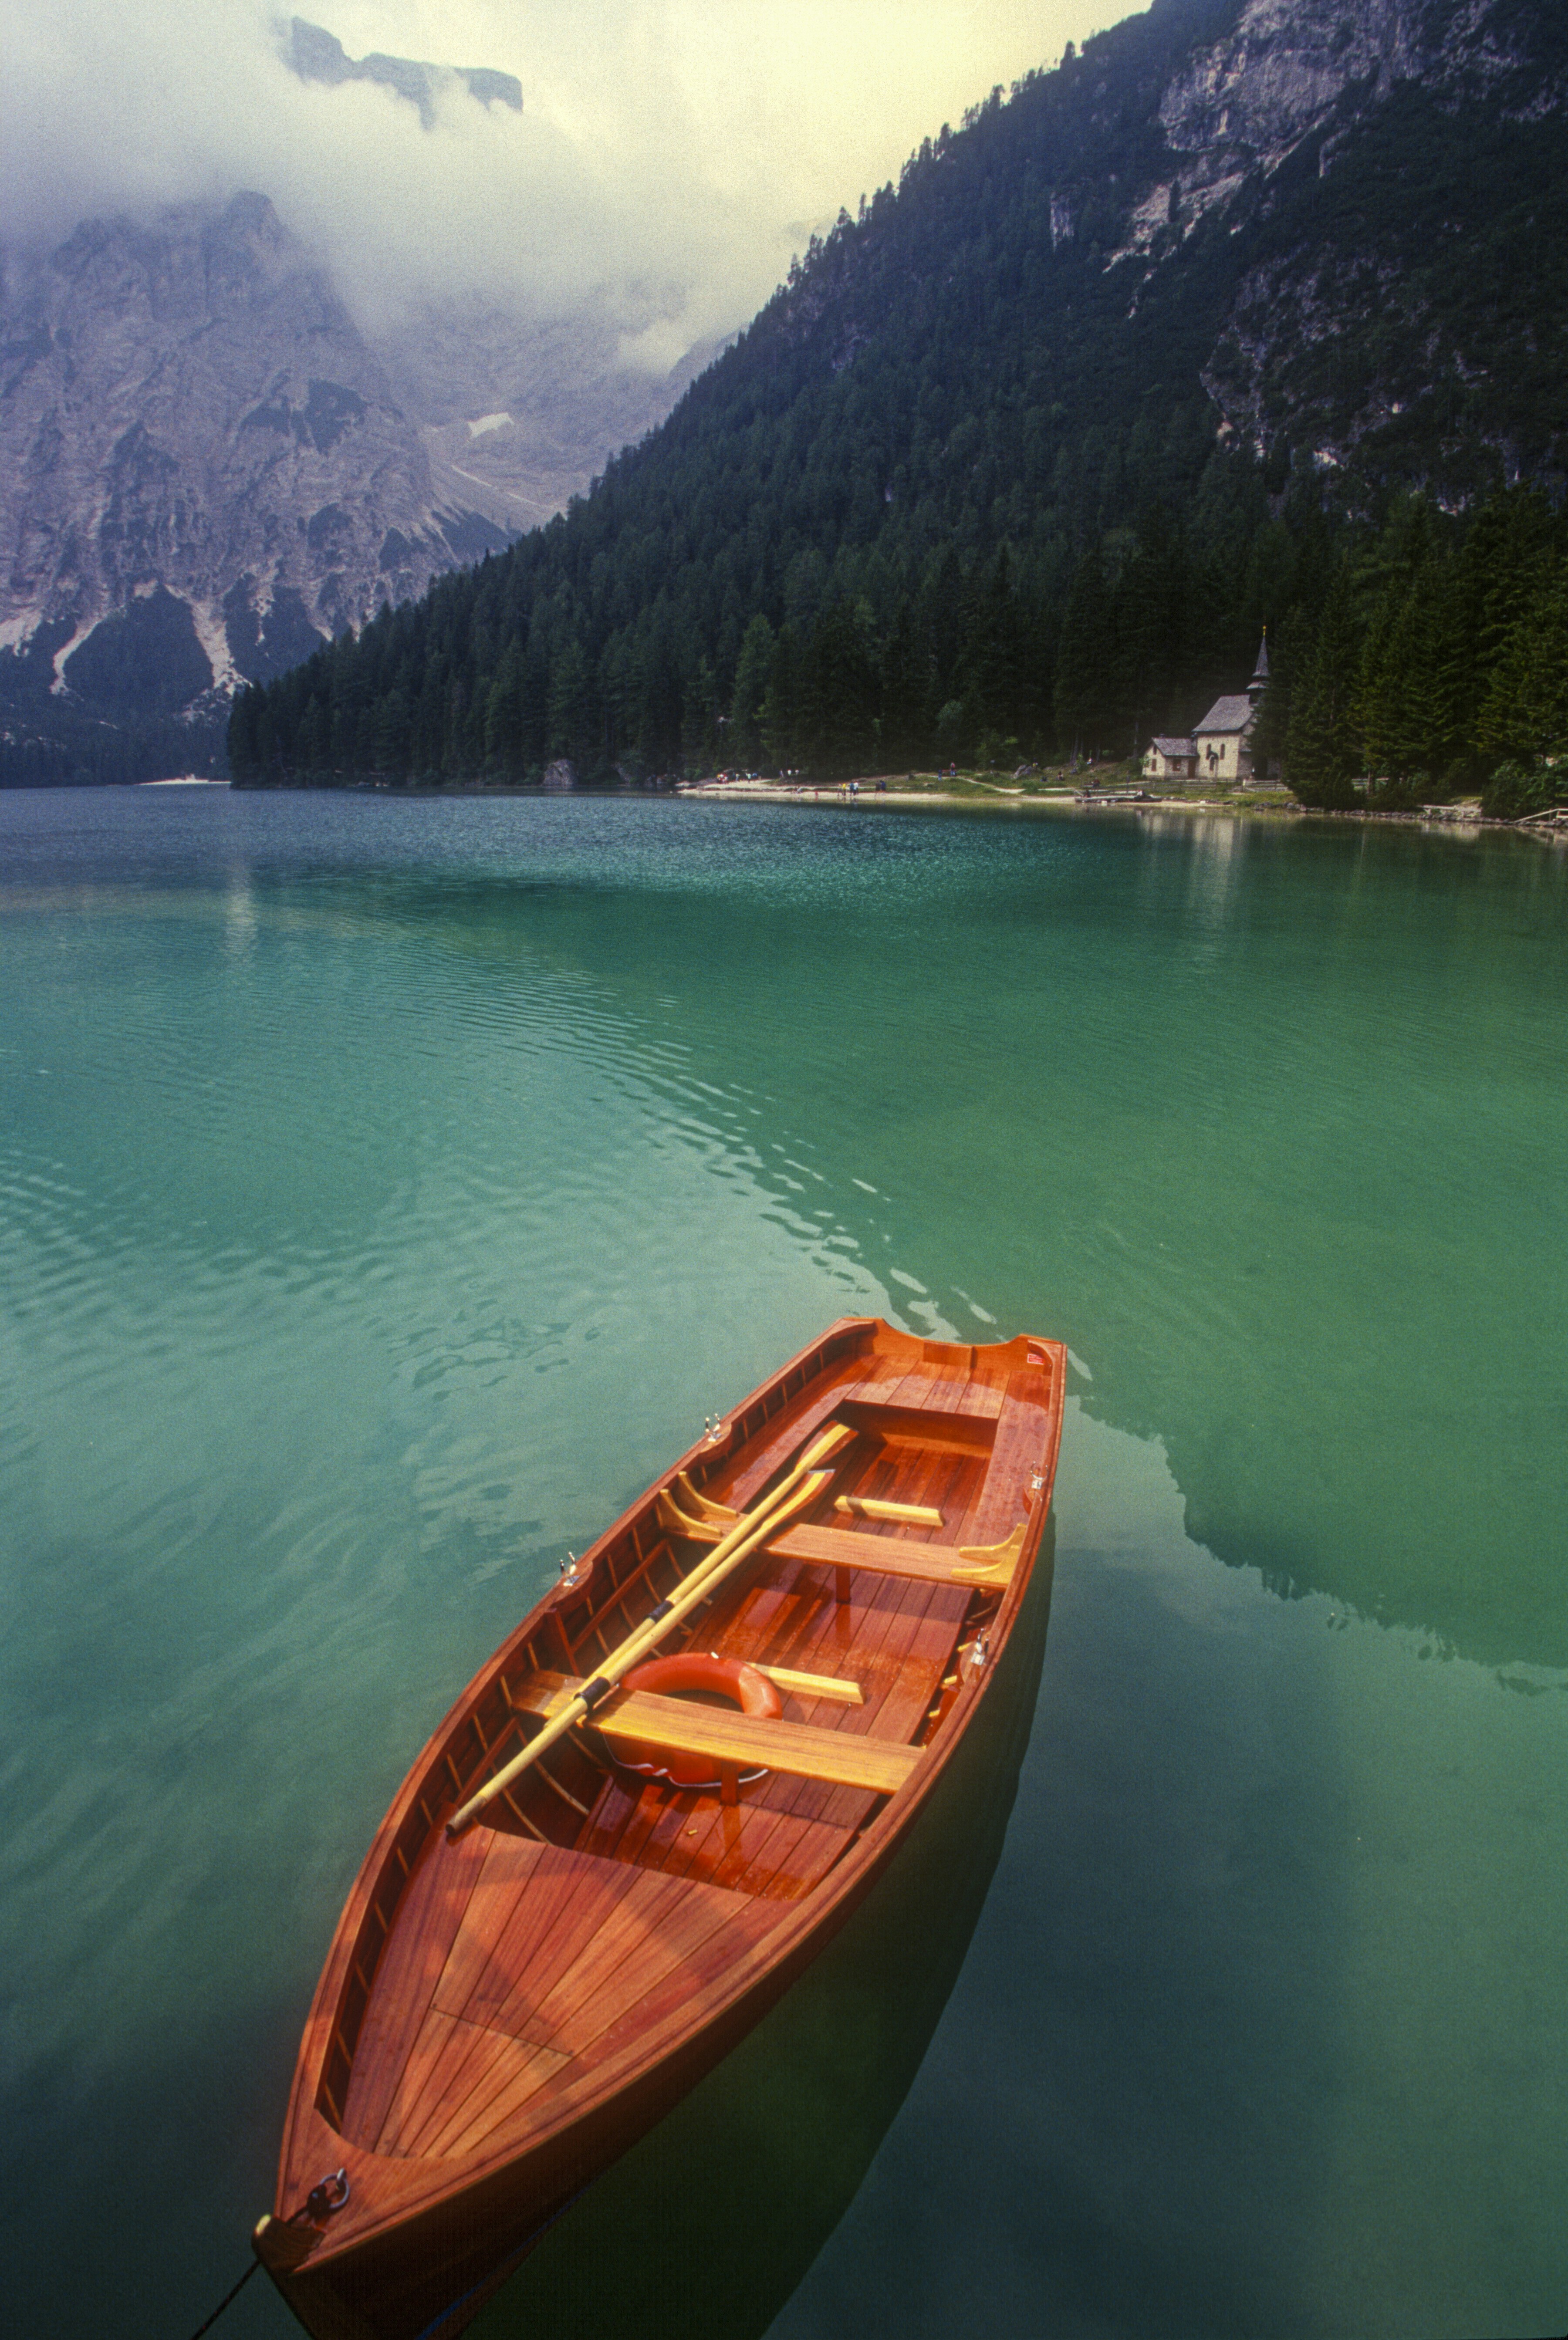 A solitary rental boat points out into the turquoise expanse of this beautiful lake in northern Italy. I shot it on slide film in 1999 and had to wait three weeks to see the image. Was so glad it came out beautifully.